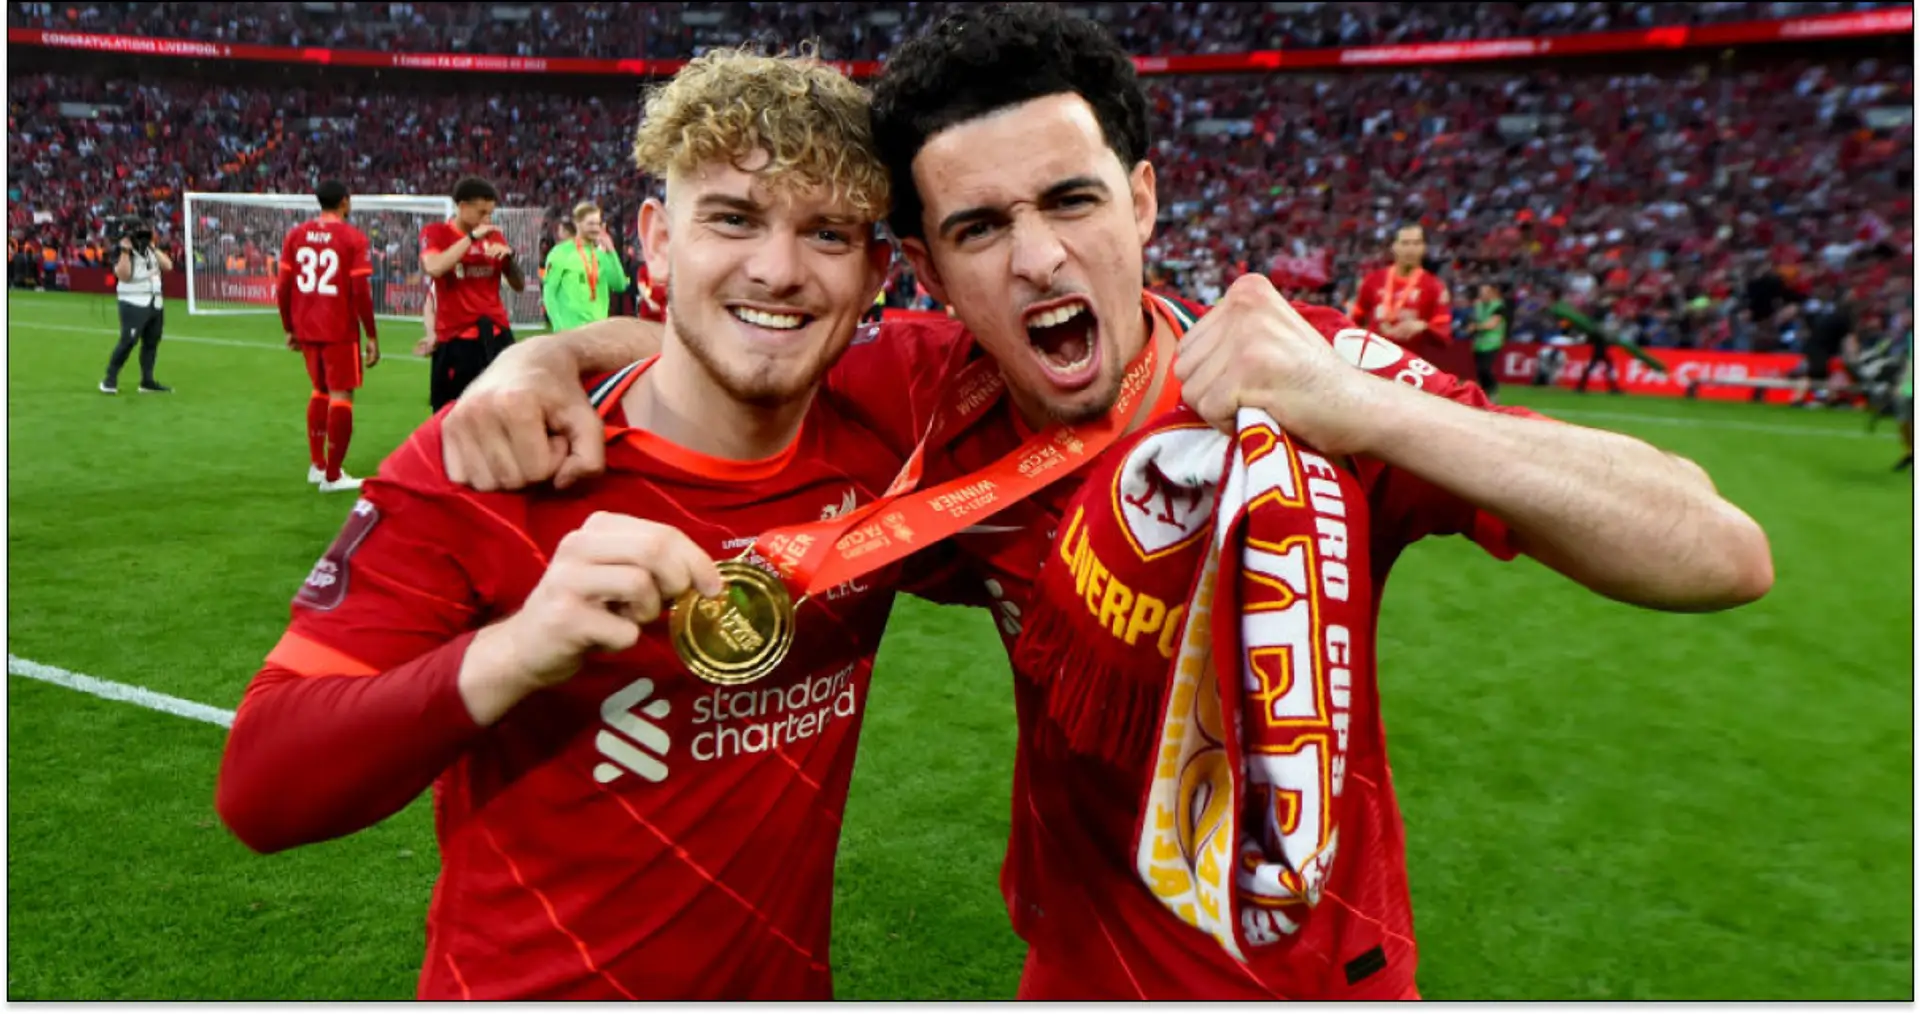 'Not only world-class players at amazing club, but friends': CuJo & Elliott on close bonds at Liverpool